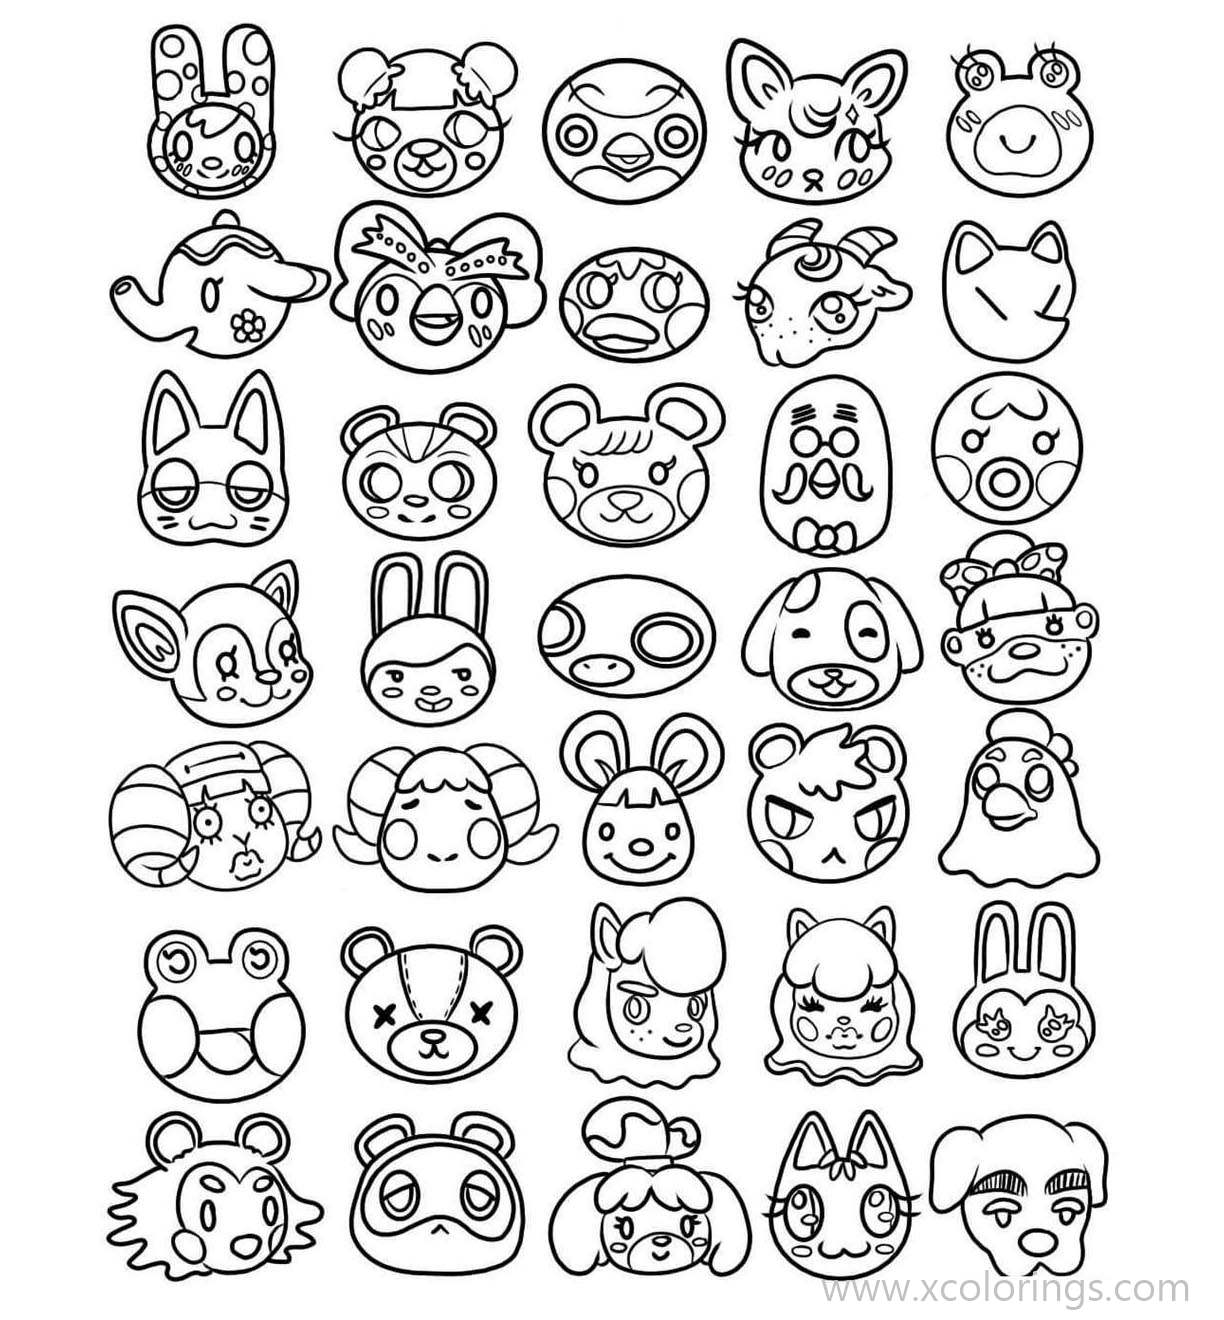 Download Animal Crossing Coloring Pages Animals Heads Xcolorings Com